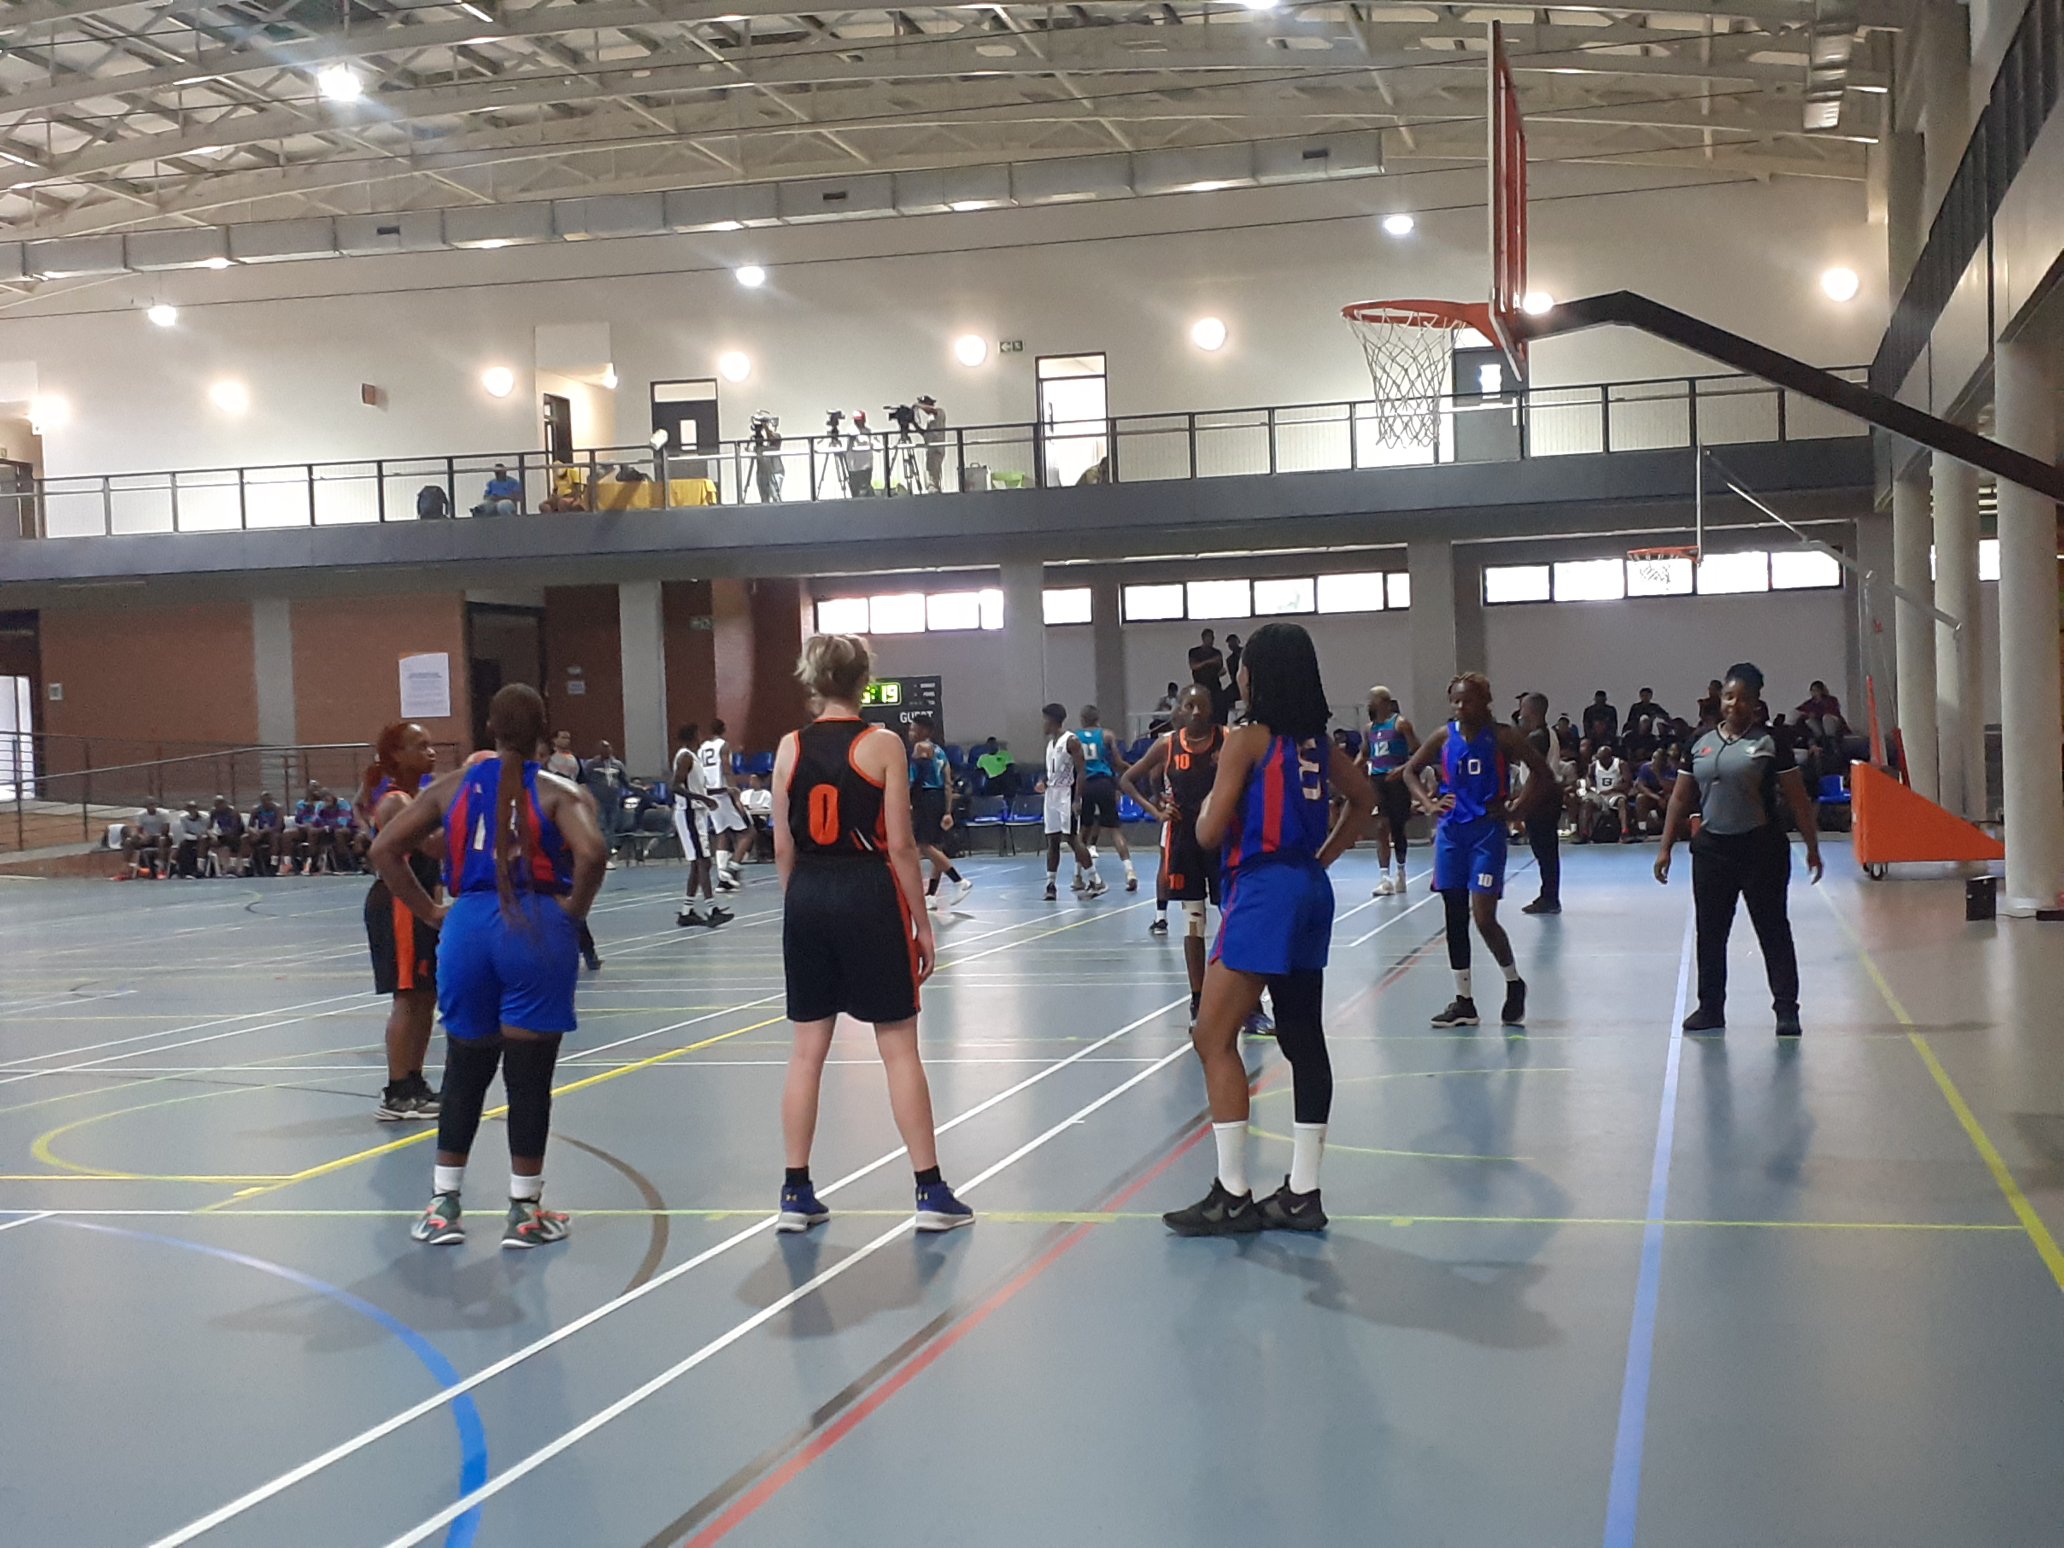 UJ Women's Basketball team in the 2022 USSA Basketball tournament at the Brixton Sports Complex.